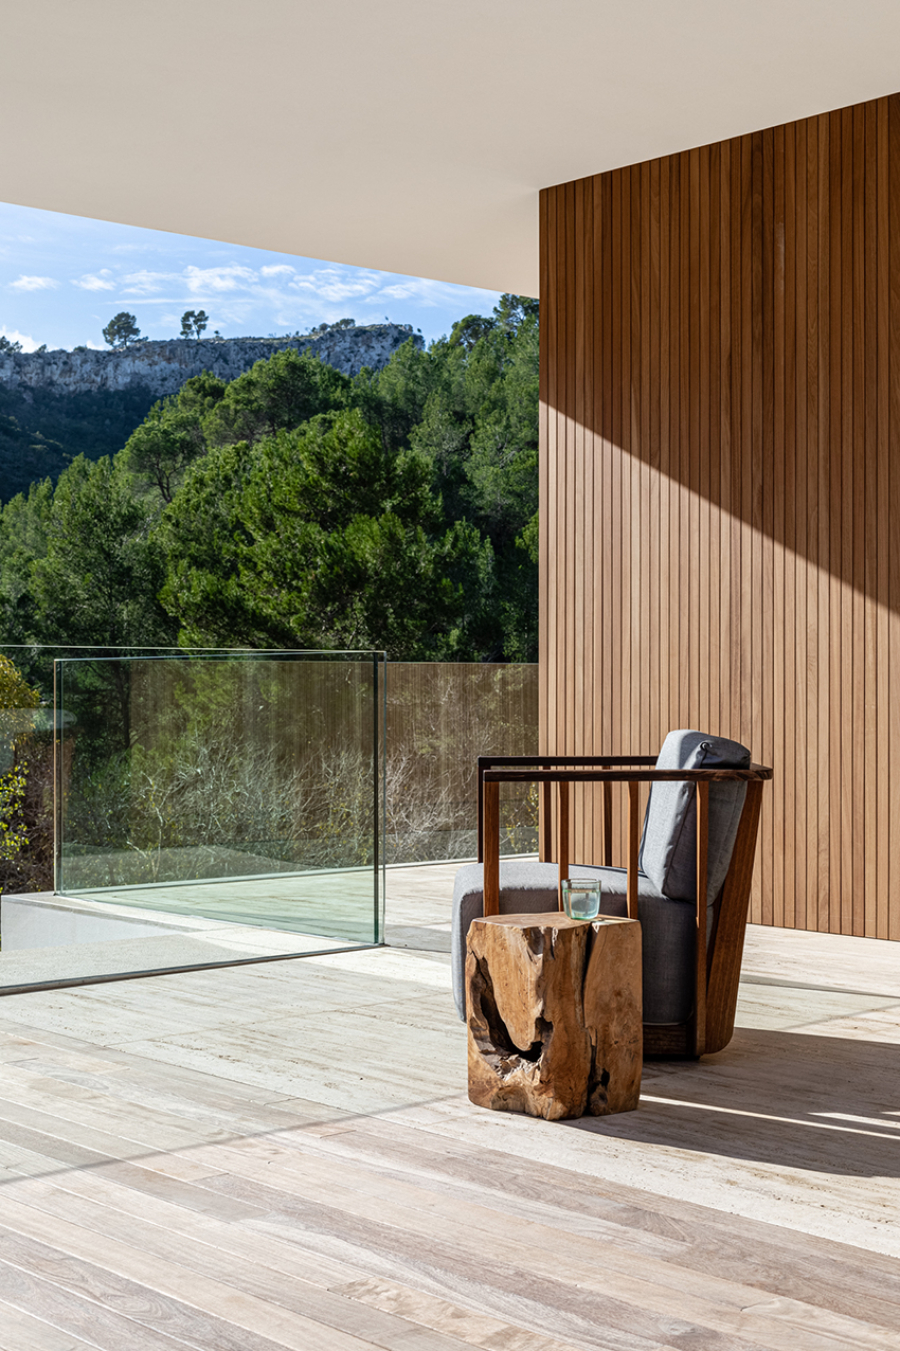 Balcony by Jorge Bibiloni Studio with a comfortable armchair and wooden side table